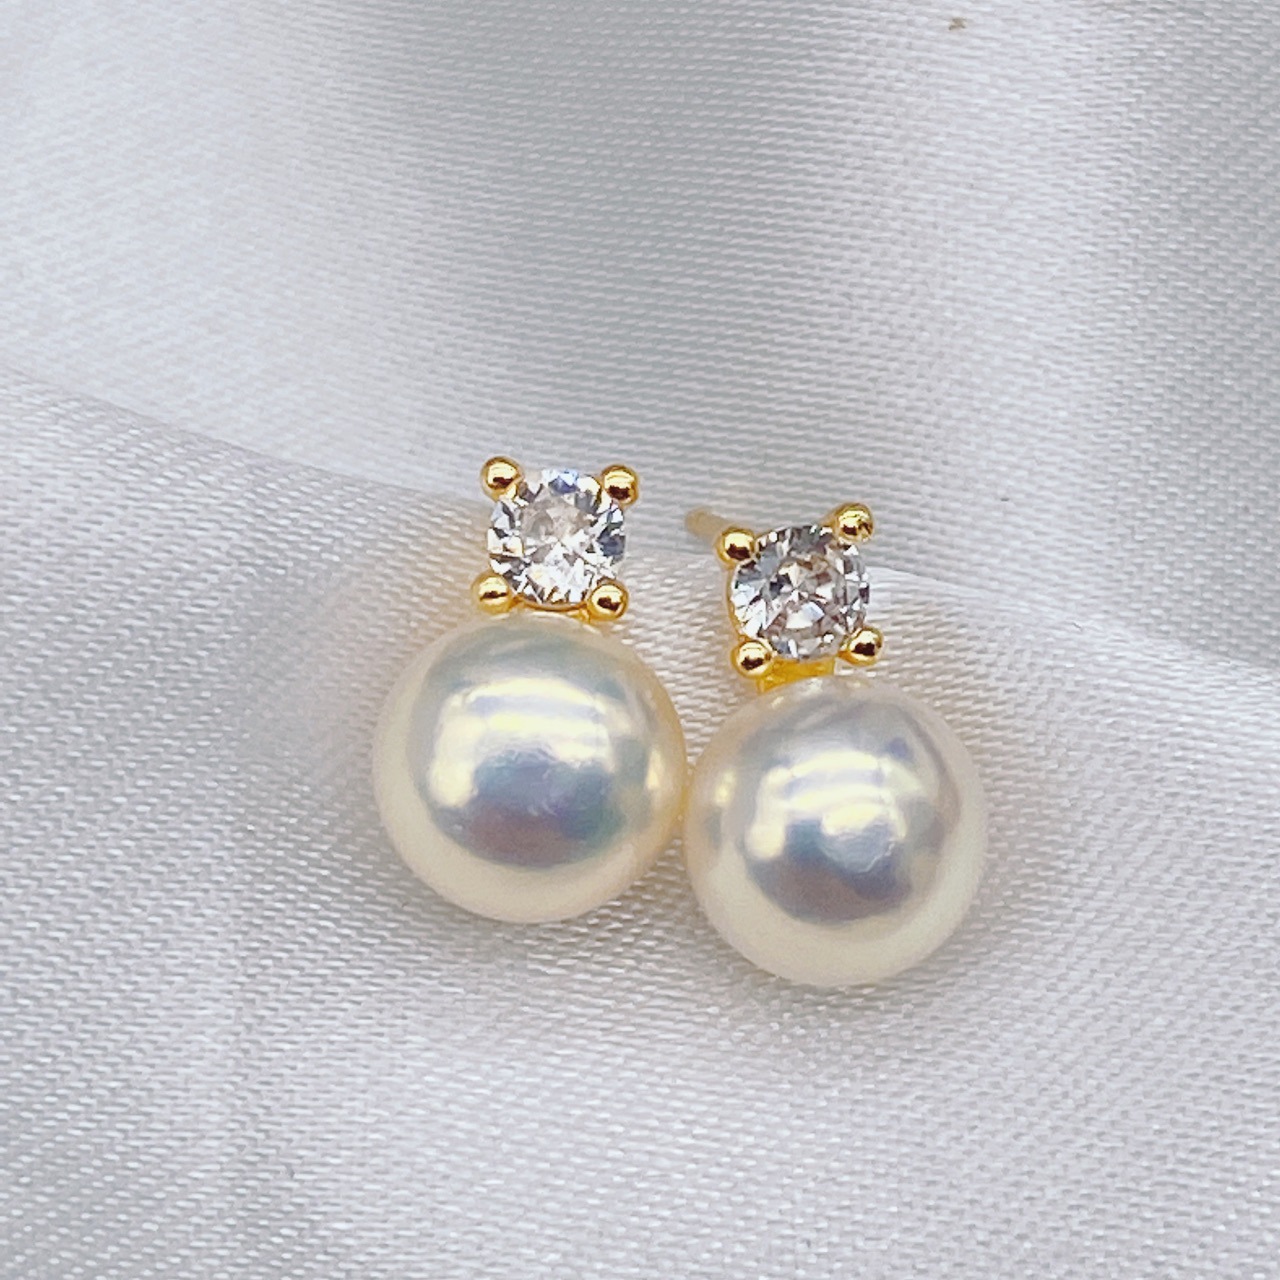 Classic Princess S925 Silver Pin Stud Earrings Natural Freshwater Pearl 7-8mm Surface Basically Flawless Pearl Earrings